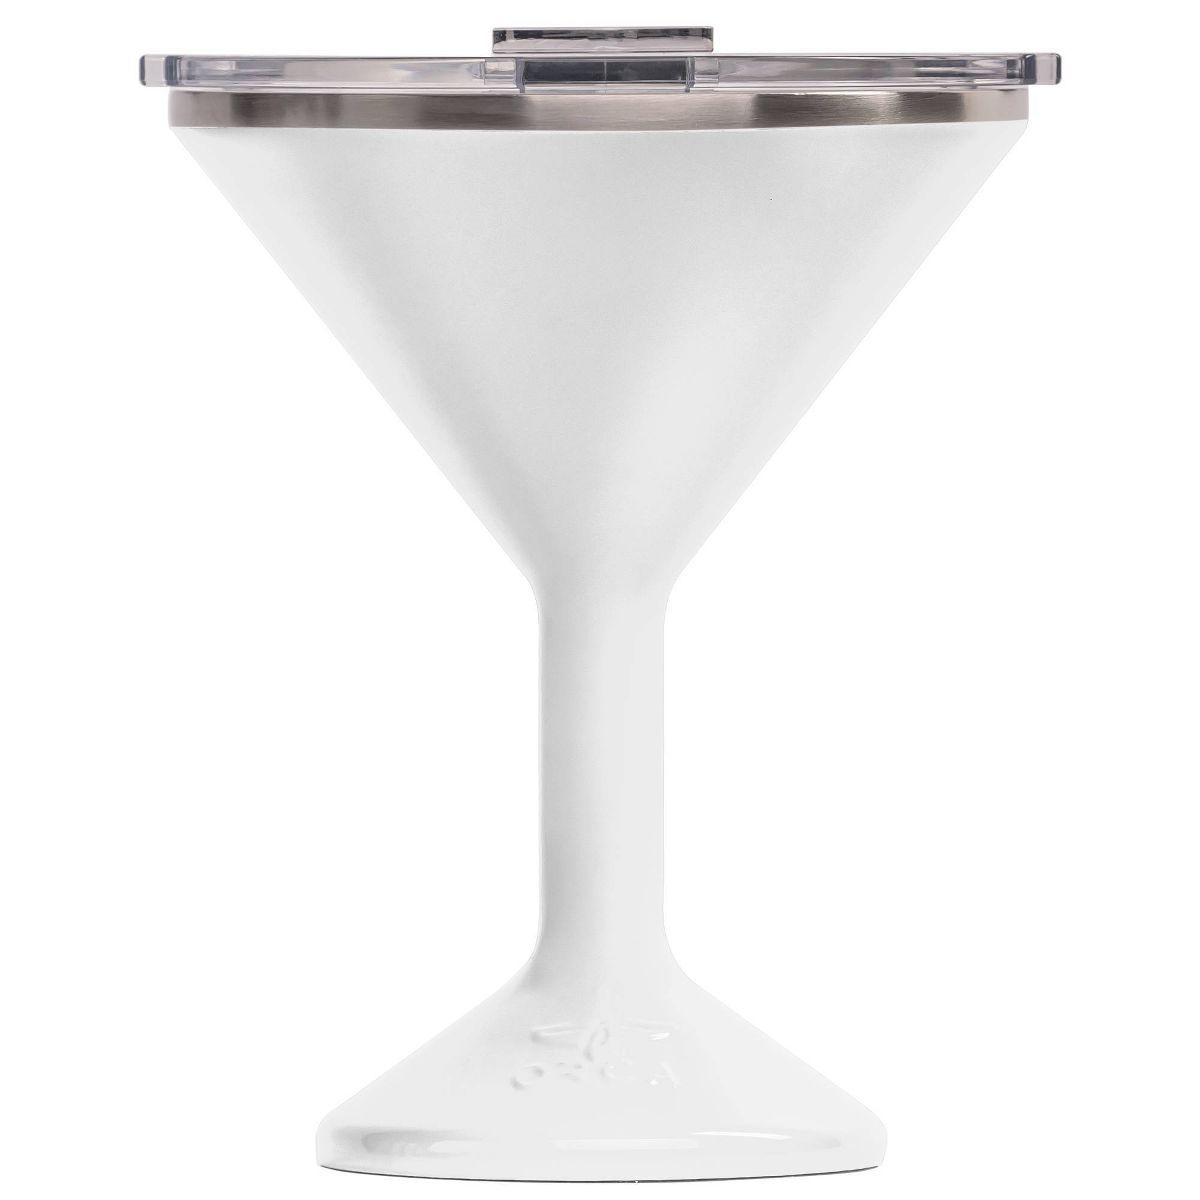 ORCA Coolers 13oz Tini Stainless Steel Lidded Martini Tumbler - Pearl | Target